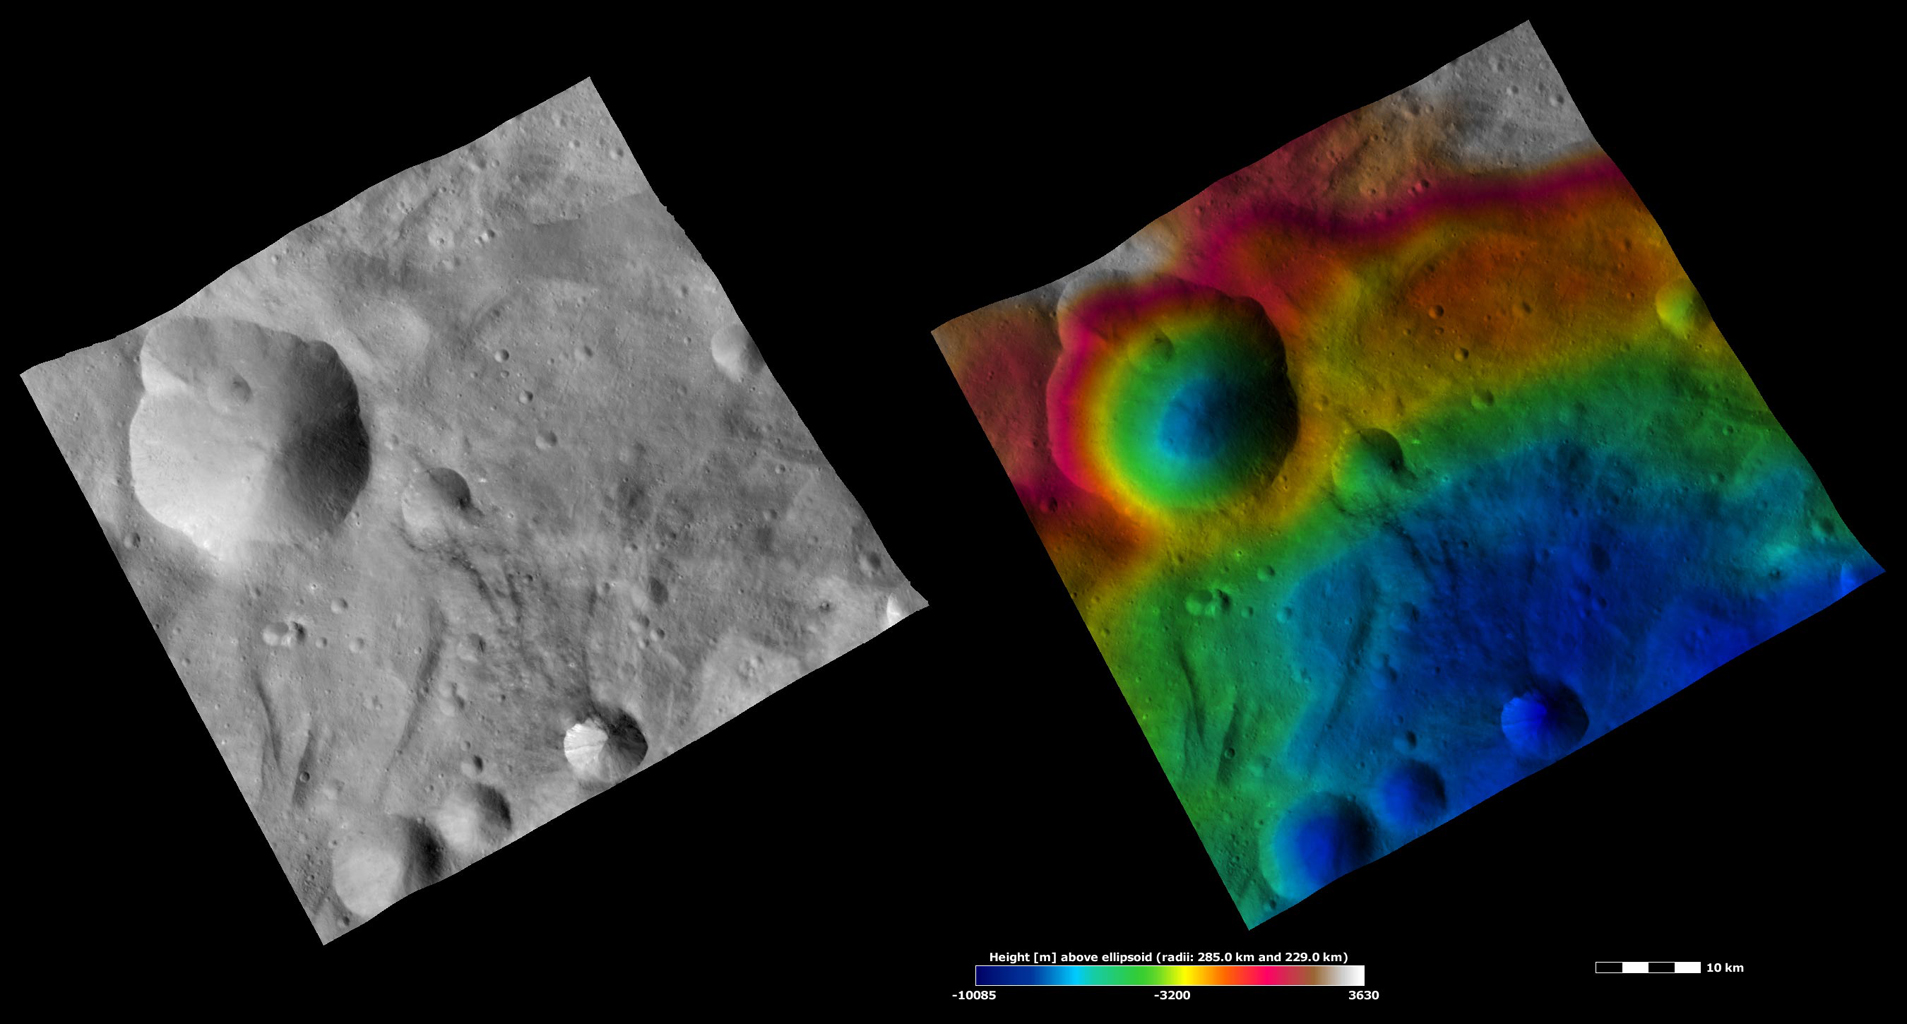 Apparent Brightness and Topography Images of Urbinia and Sossia Craters